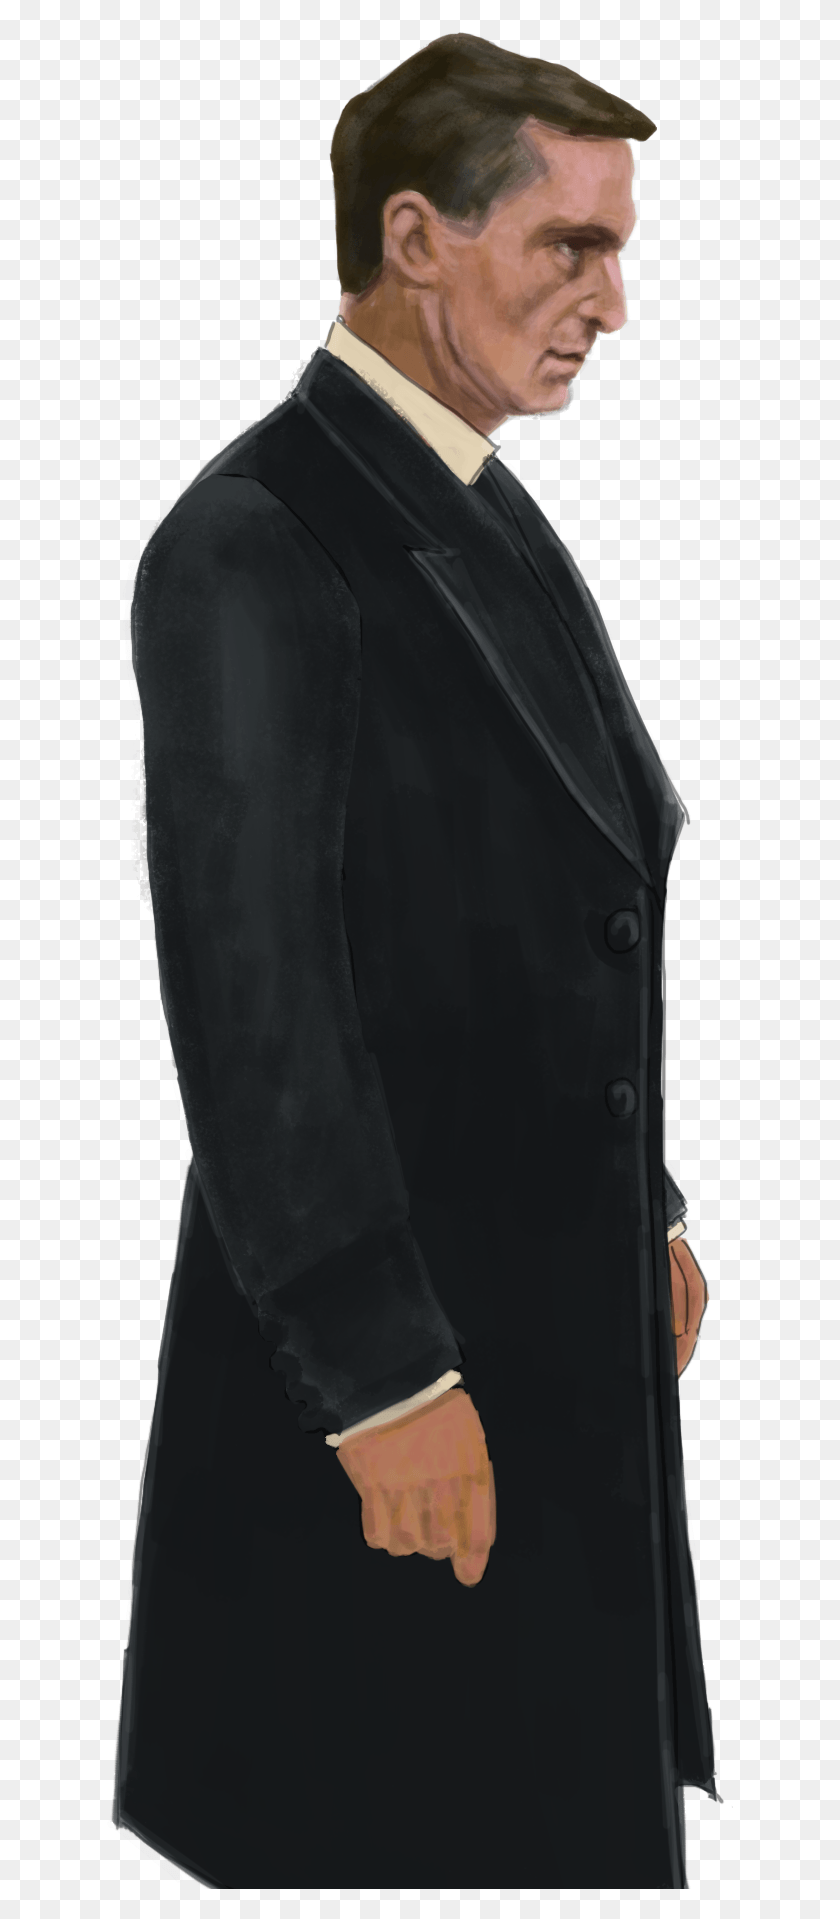 627x1859 The Software Used For Illustrations Is Photoshop Tuxedo, Clothing, Apparel, Overcoat Descargar Hd Png